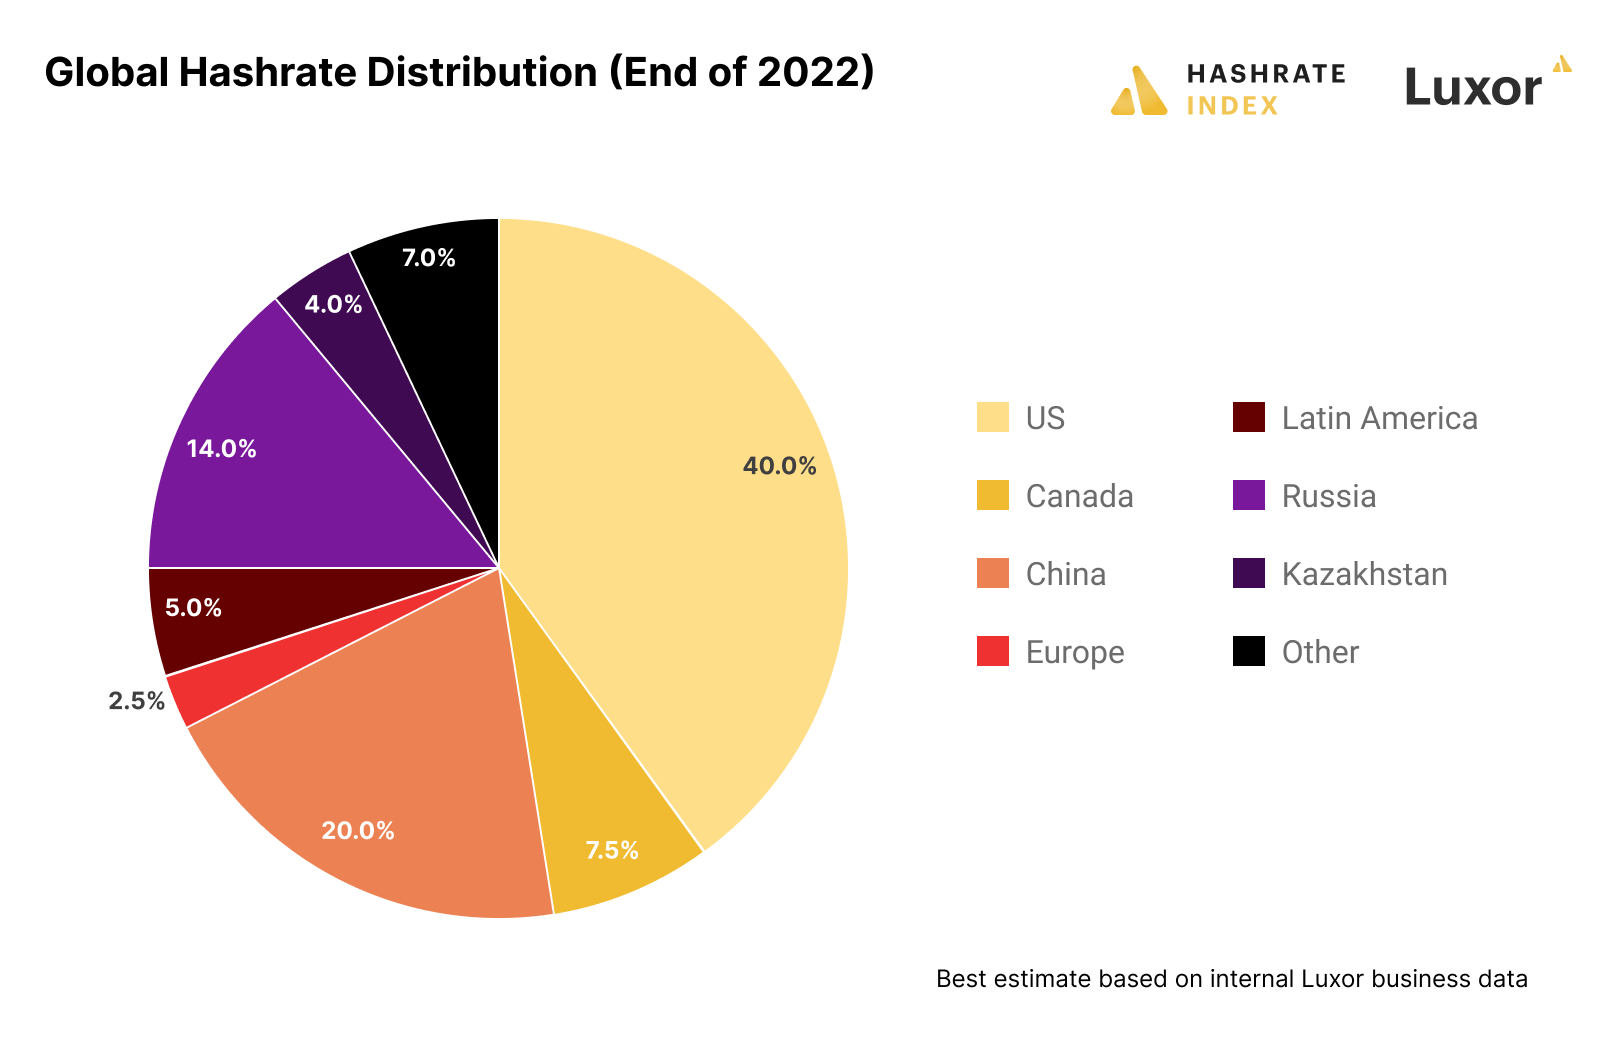 Hashrate Index's estimates for global hashrate based on available public data and Luxor business data 